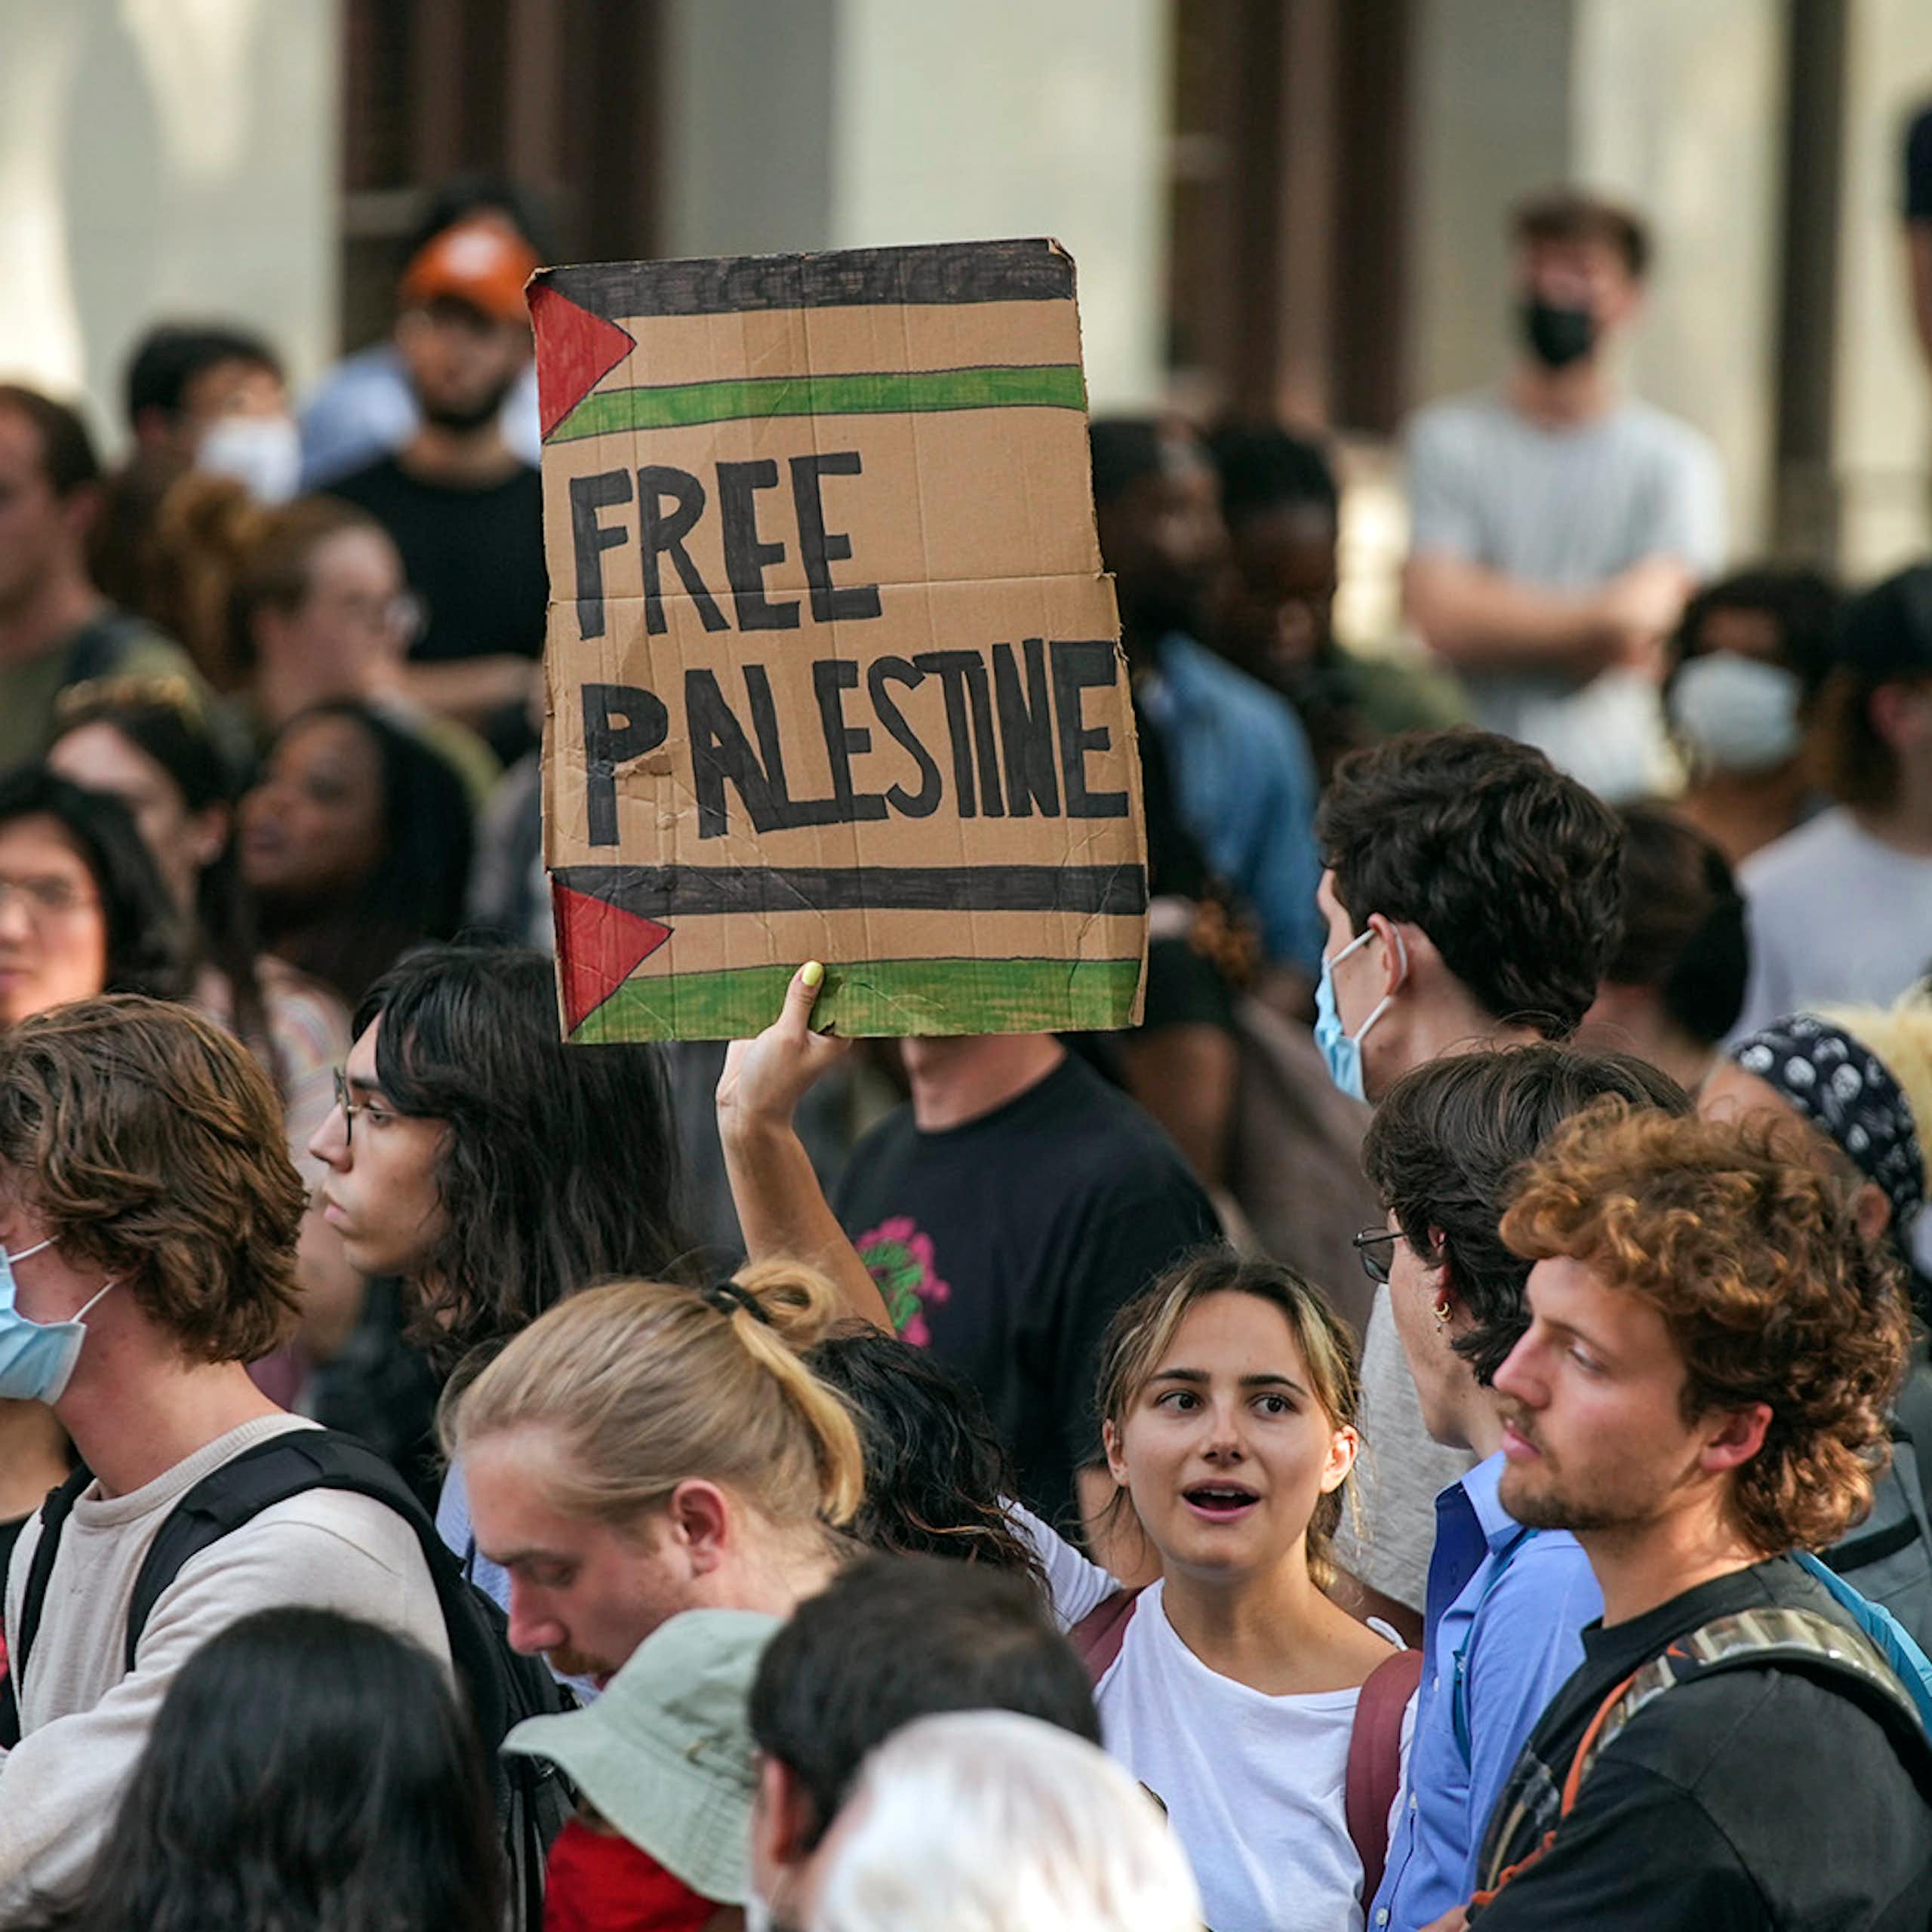 A sign says 'Free Palestine' at a protest.